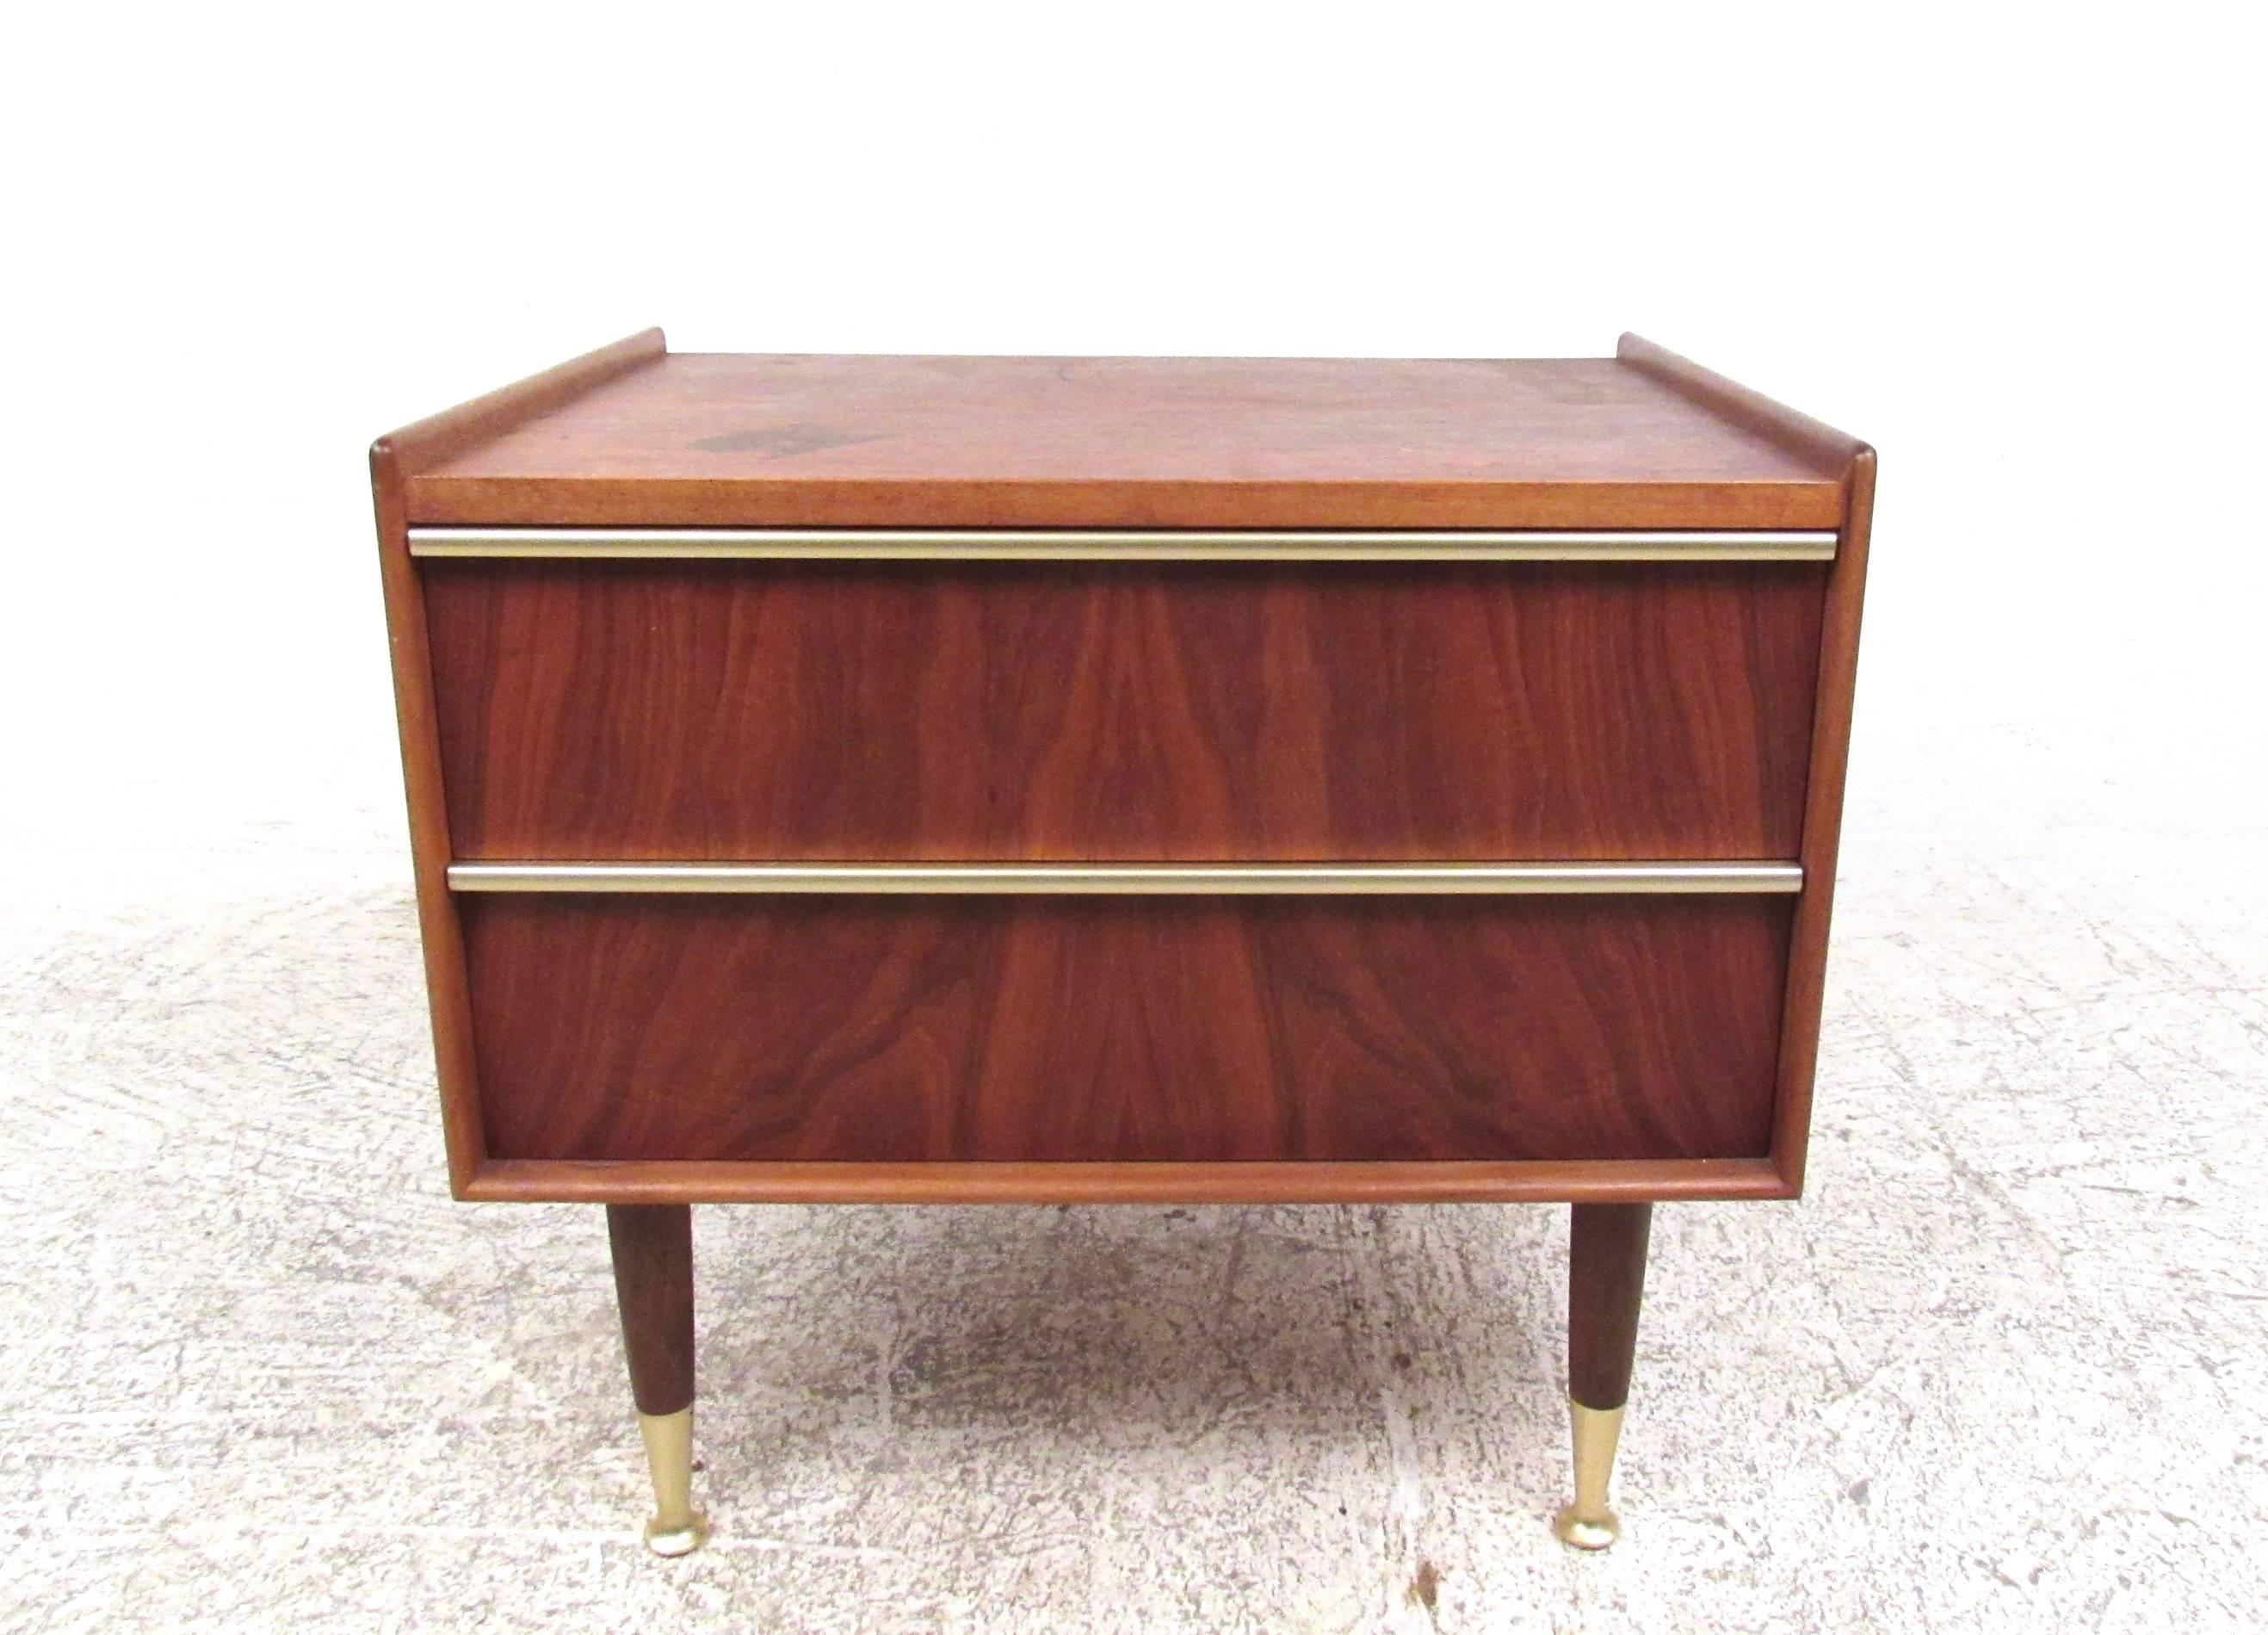 This single nightstand by Edmond Spence features unique raised edge design with brass finish trim on drawer pulls and feet. Tapered legs and rich natural finish add to the Mid-Century Modern style of this Swedish made piece. Two drawers for stylish